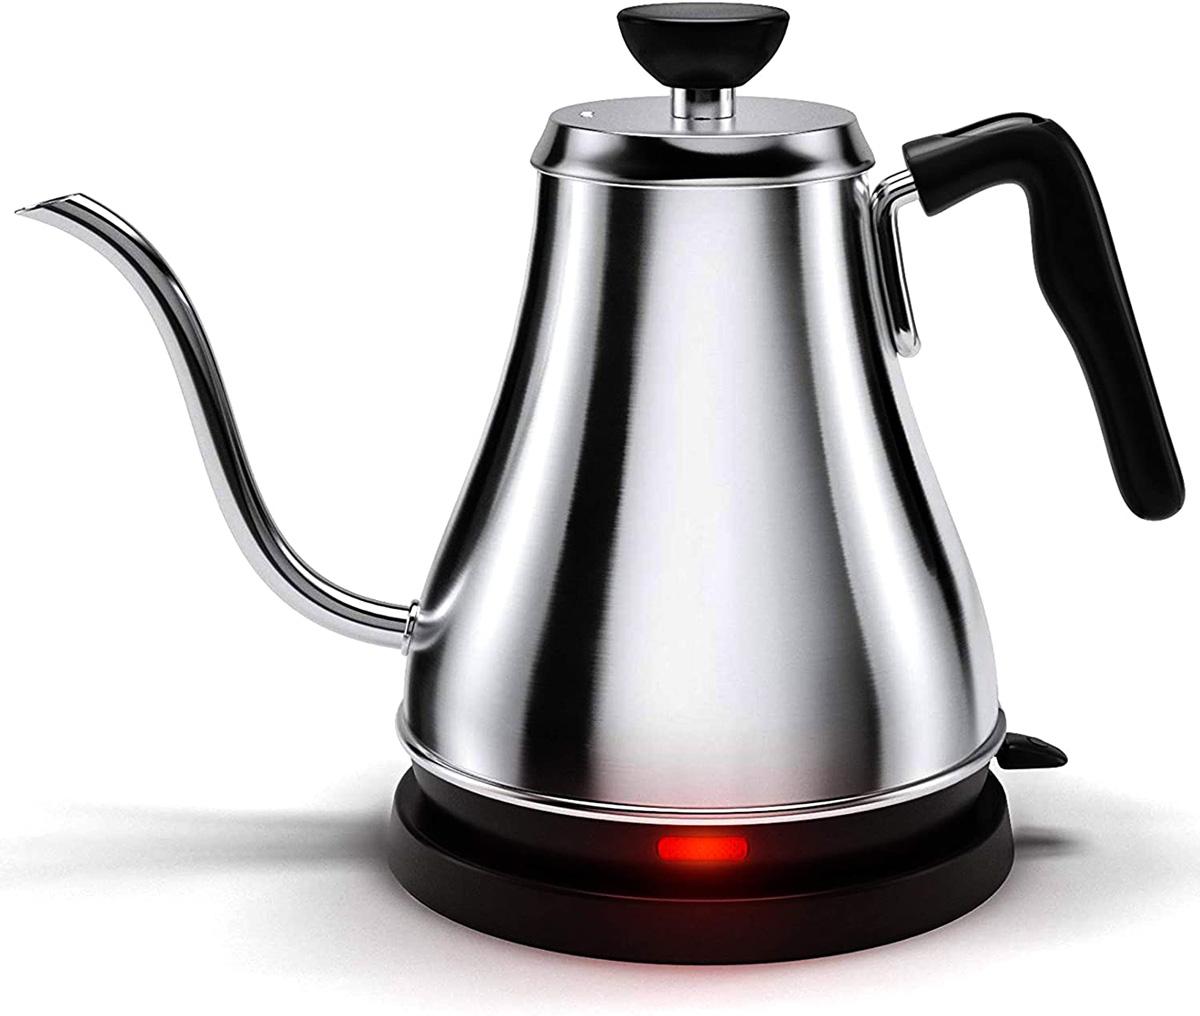 Willow and Everett Electric Gooseneck Kettle Teapot for $17.49 Shipped